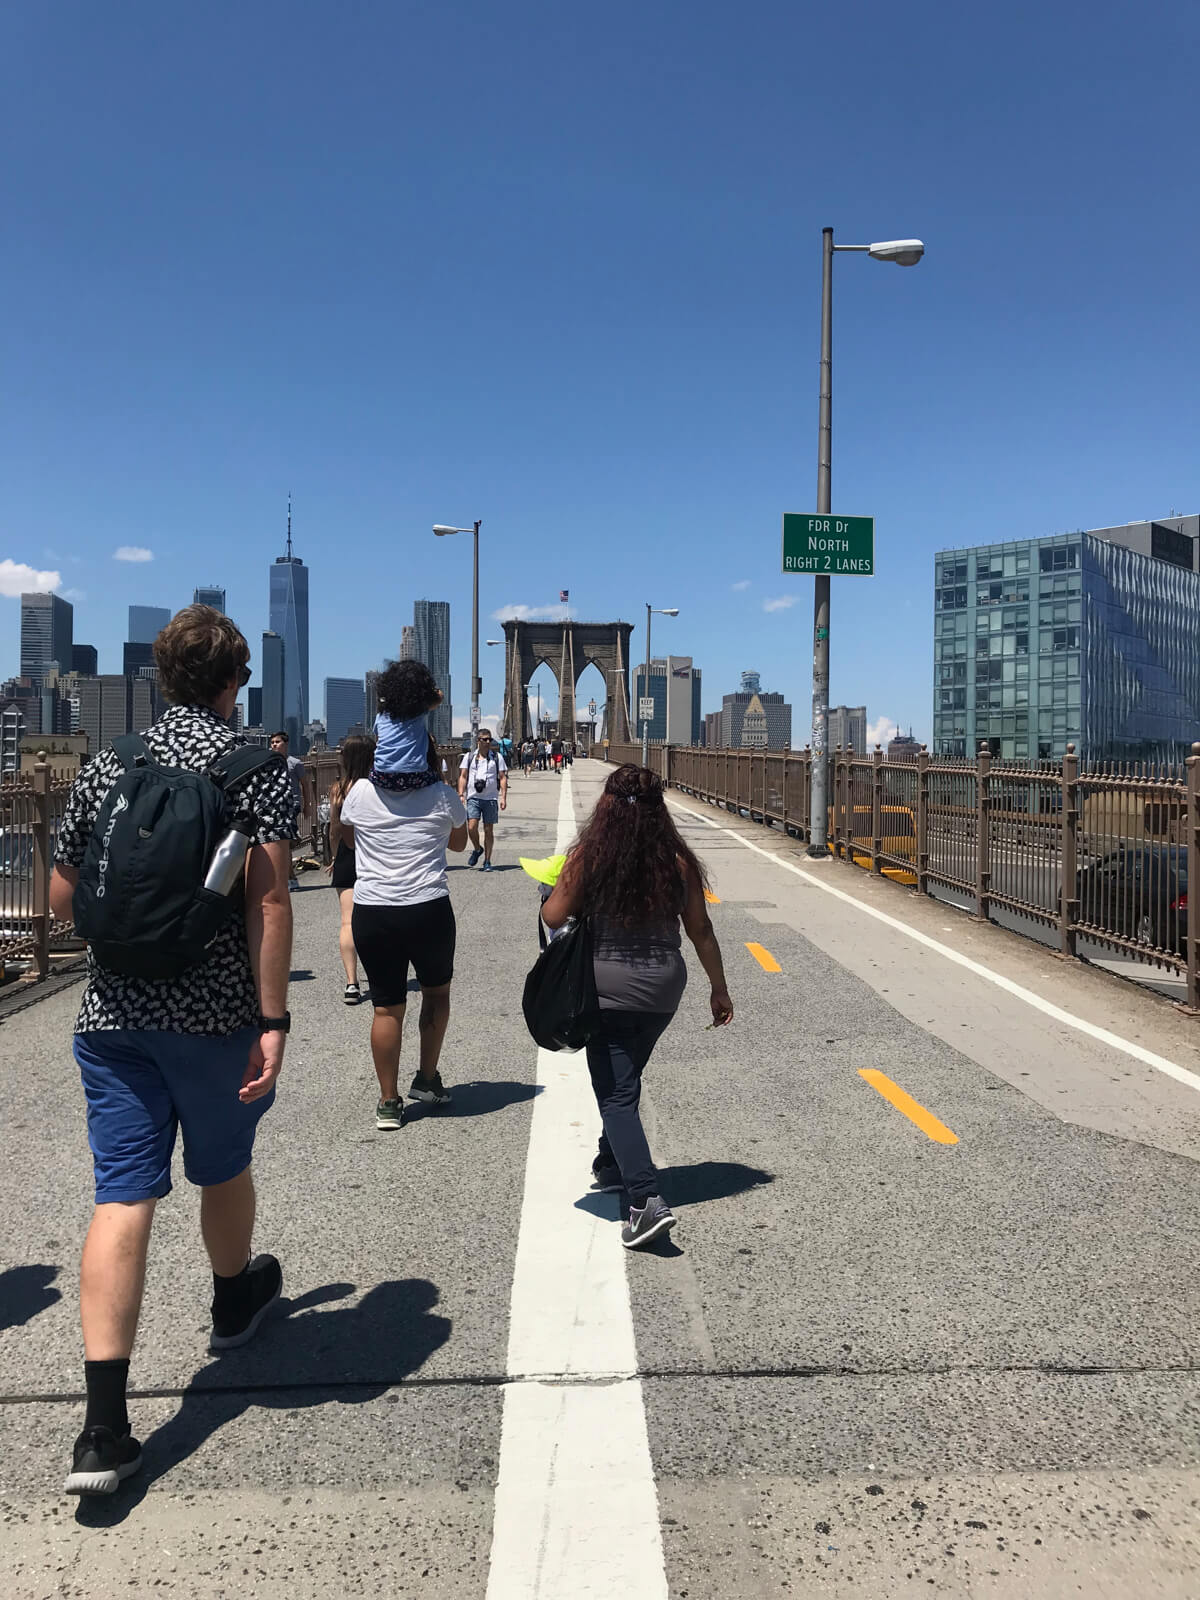 Some people approaching a road leading to a bridge. In the background are some high-rise buildings